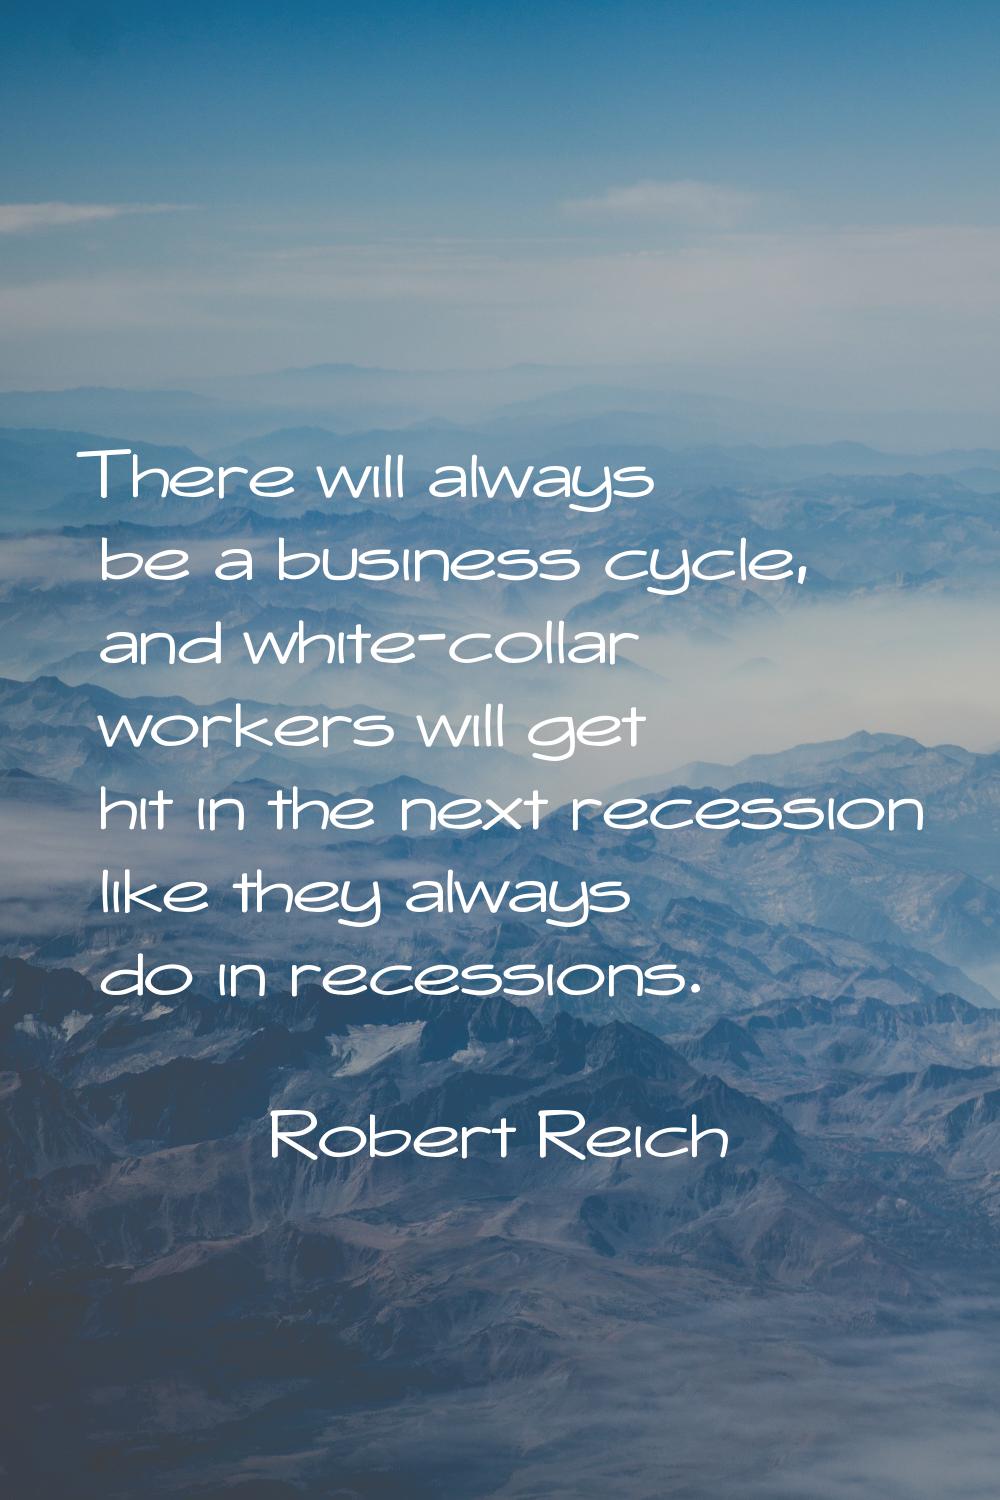 There will always be a business cycle, and white-collar workers will get hit in the next recession 